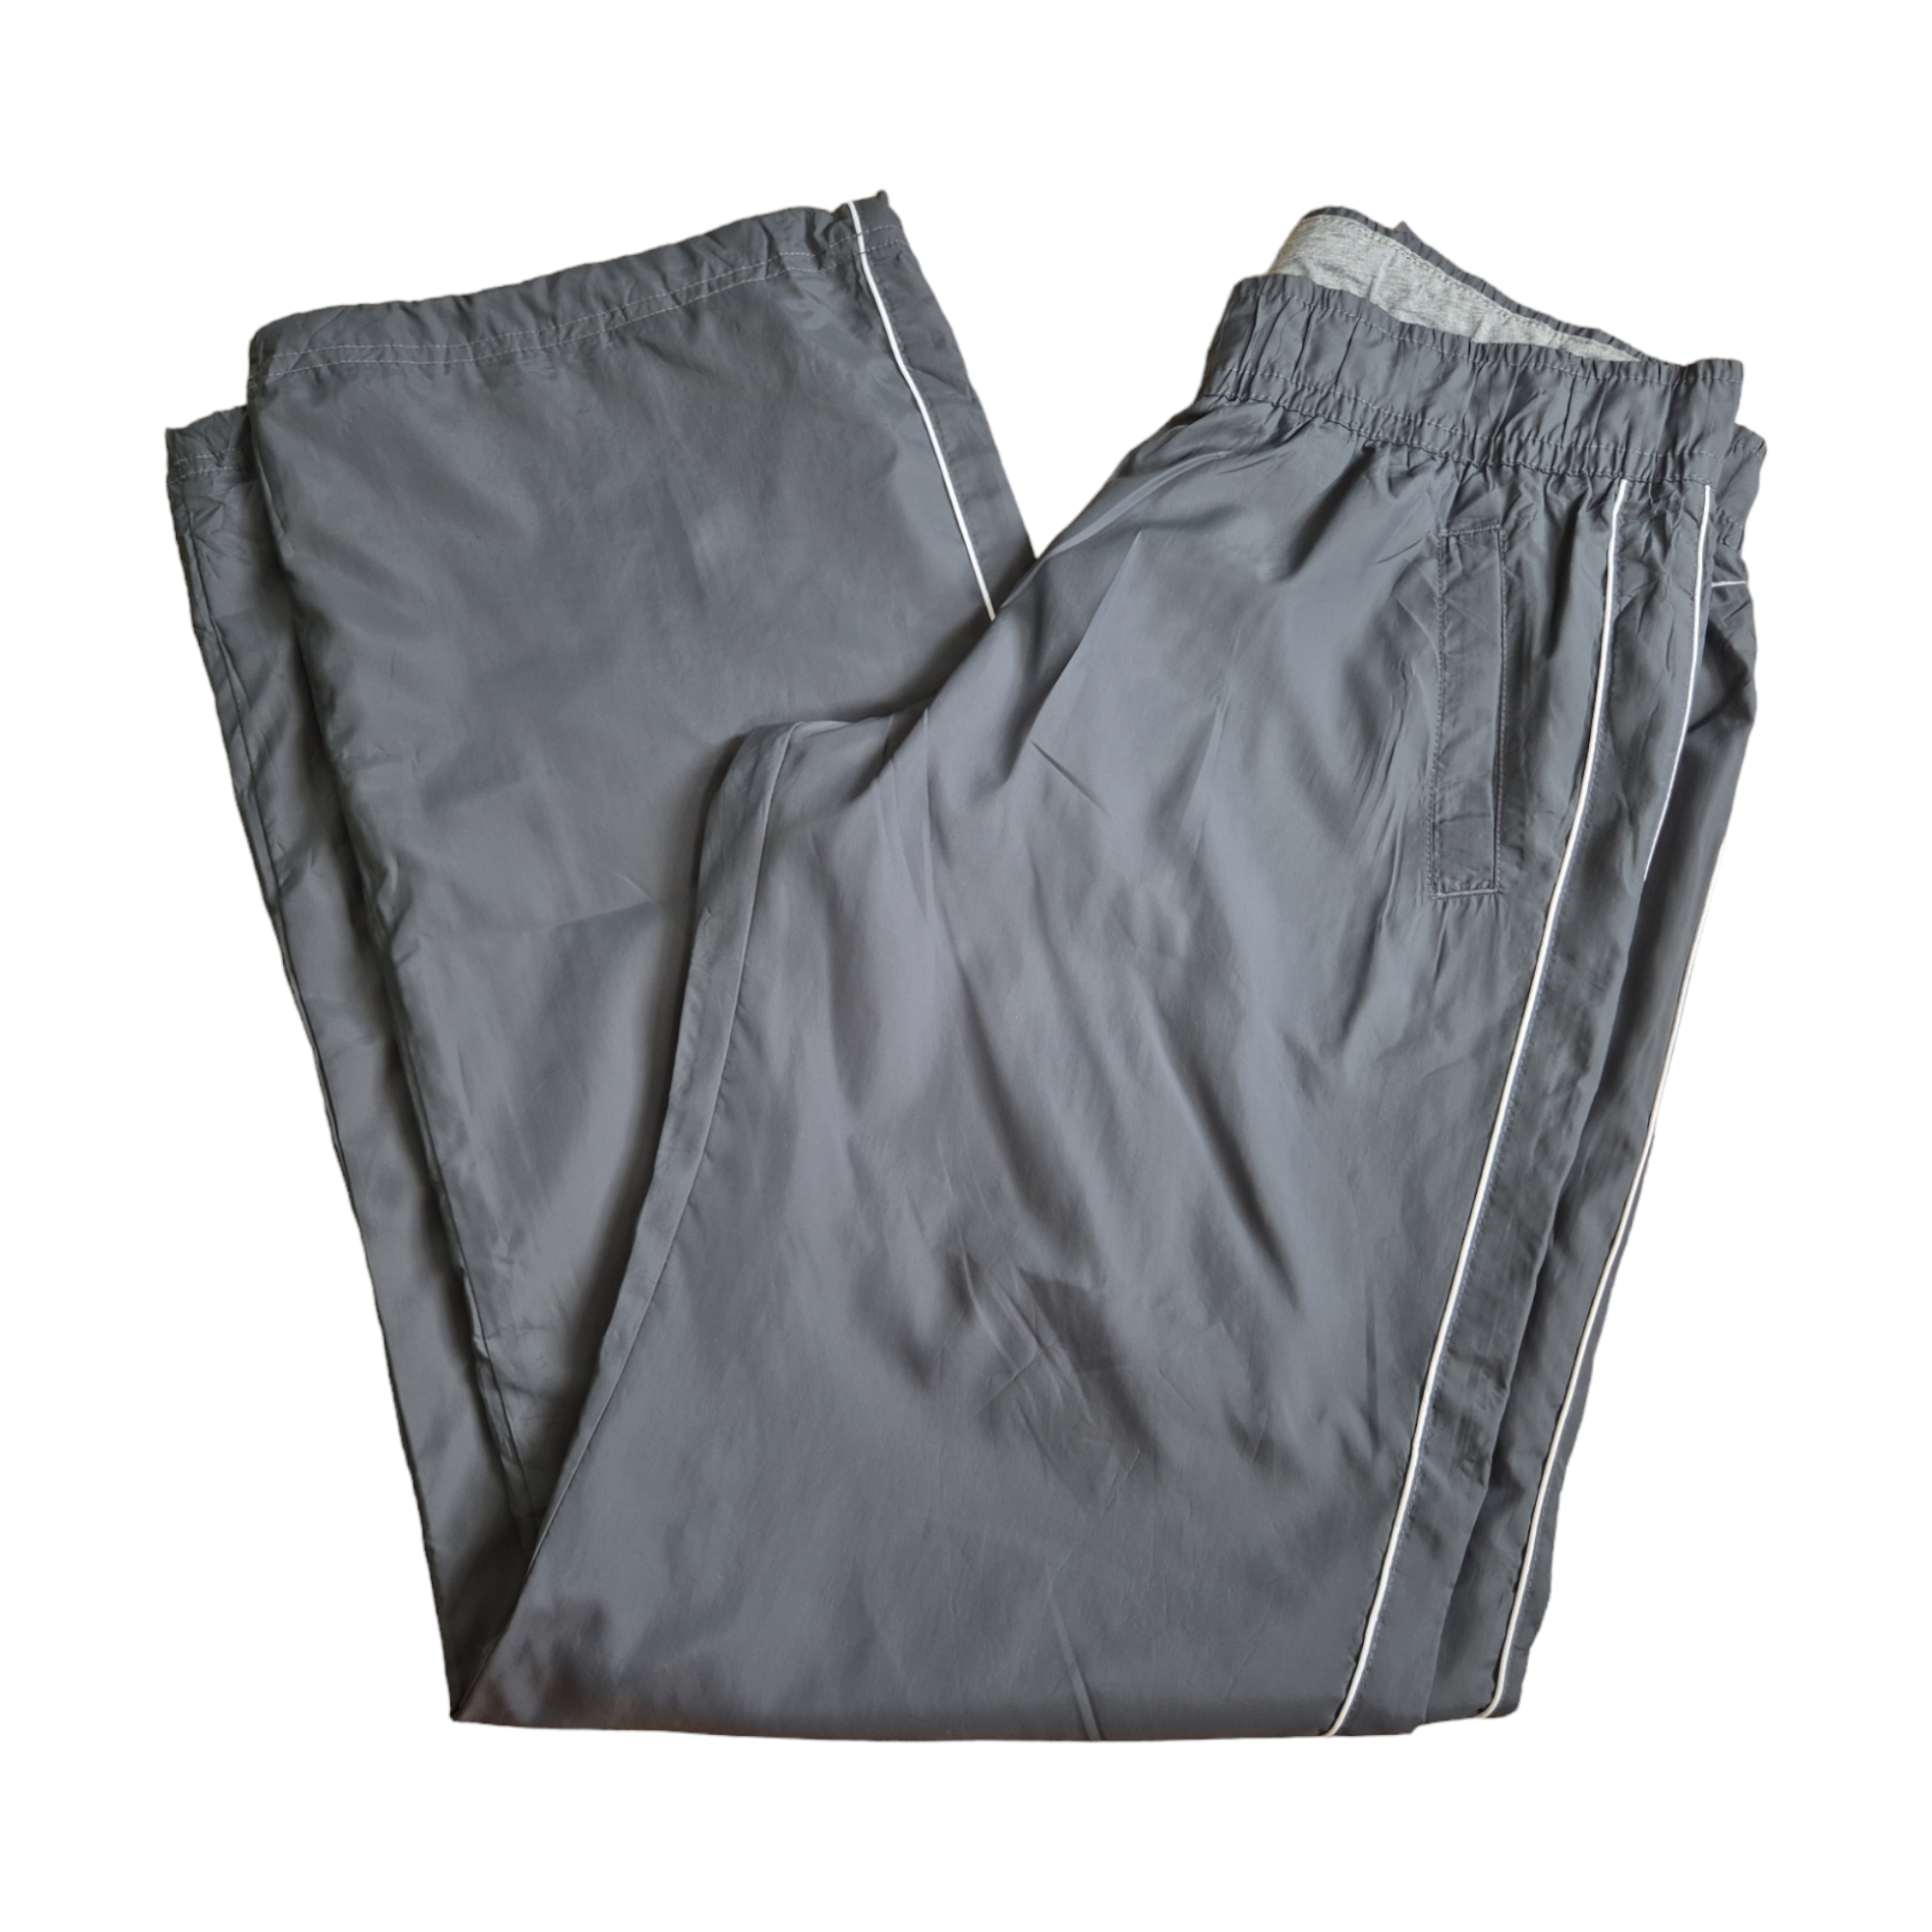 [M] Nike the athletic dept Trackpants